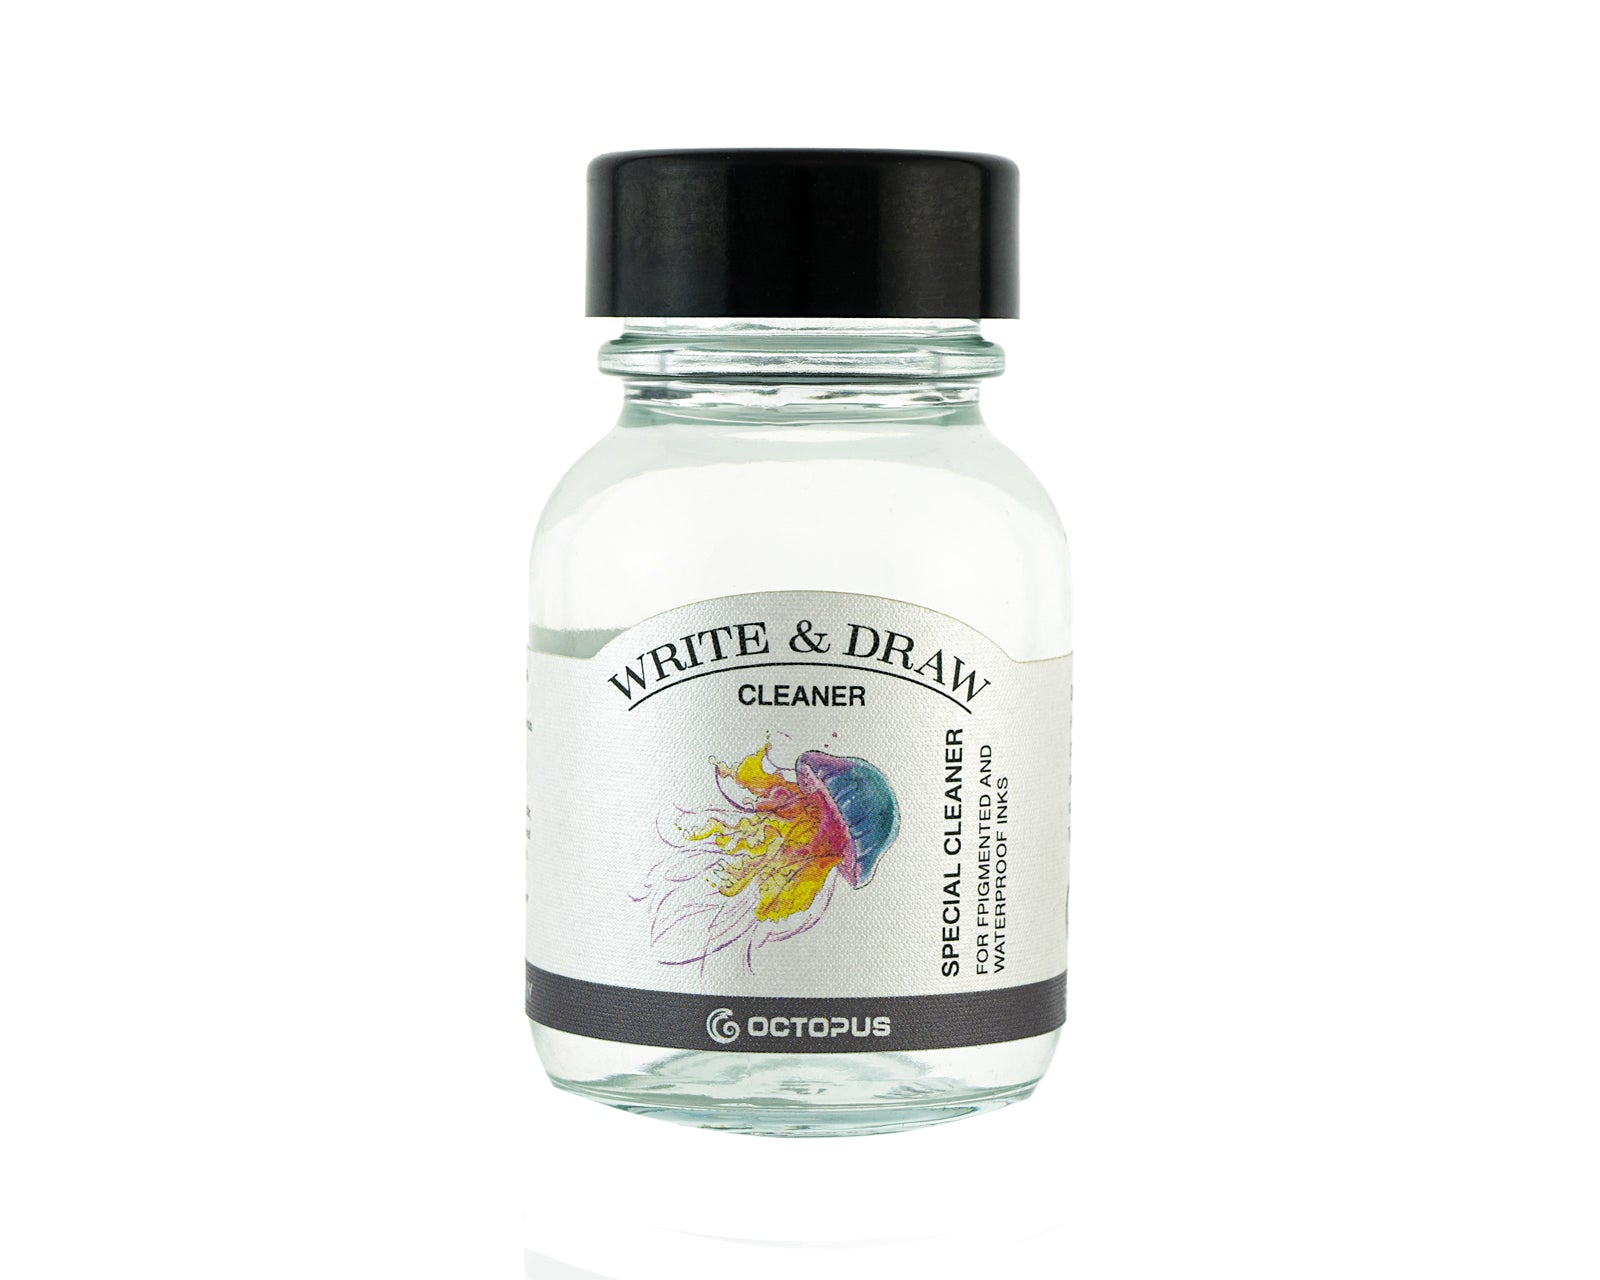 Octopus Write & Draw ink 50ml - Cleaner